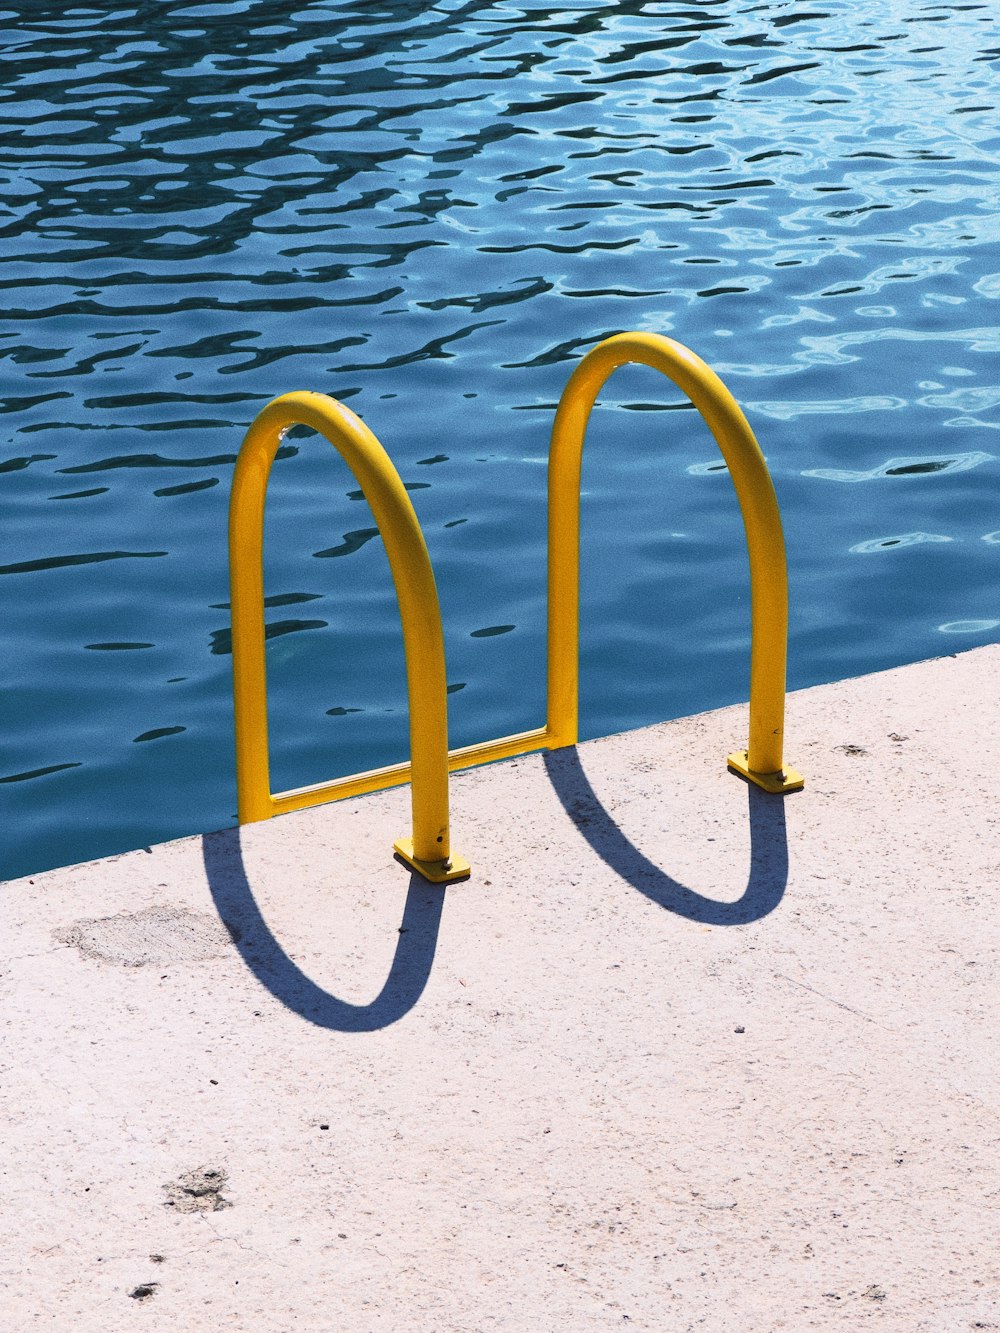 a pair of yellow bars sitting next to a body of water